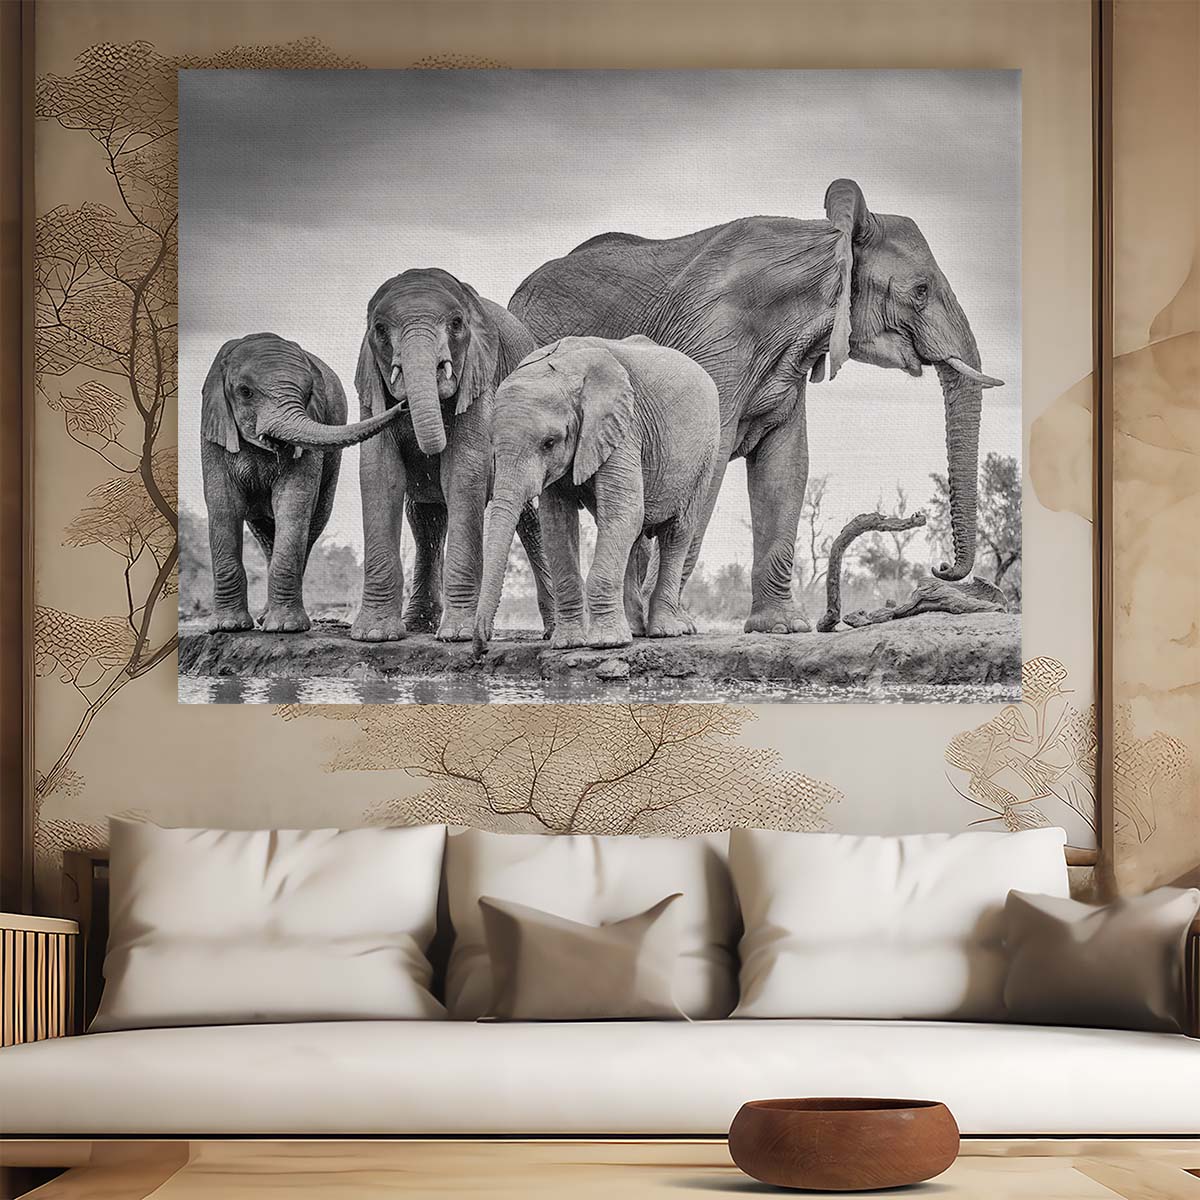 Majestic Elephant Family Gathering Wall Art in Monochrome by Luxuriance Designs. Made in USA.